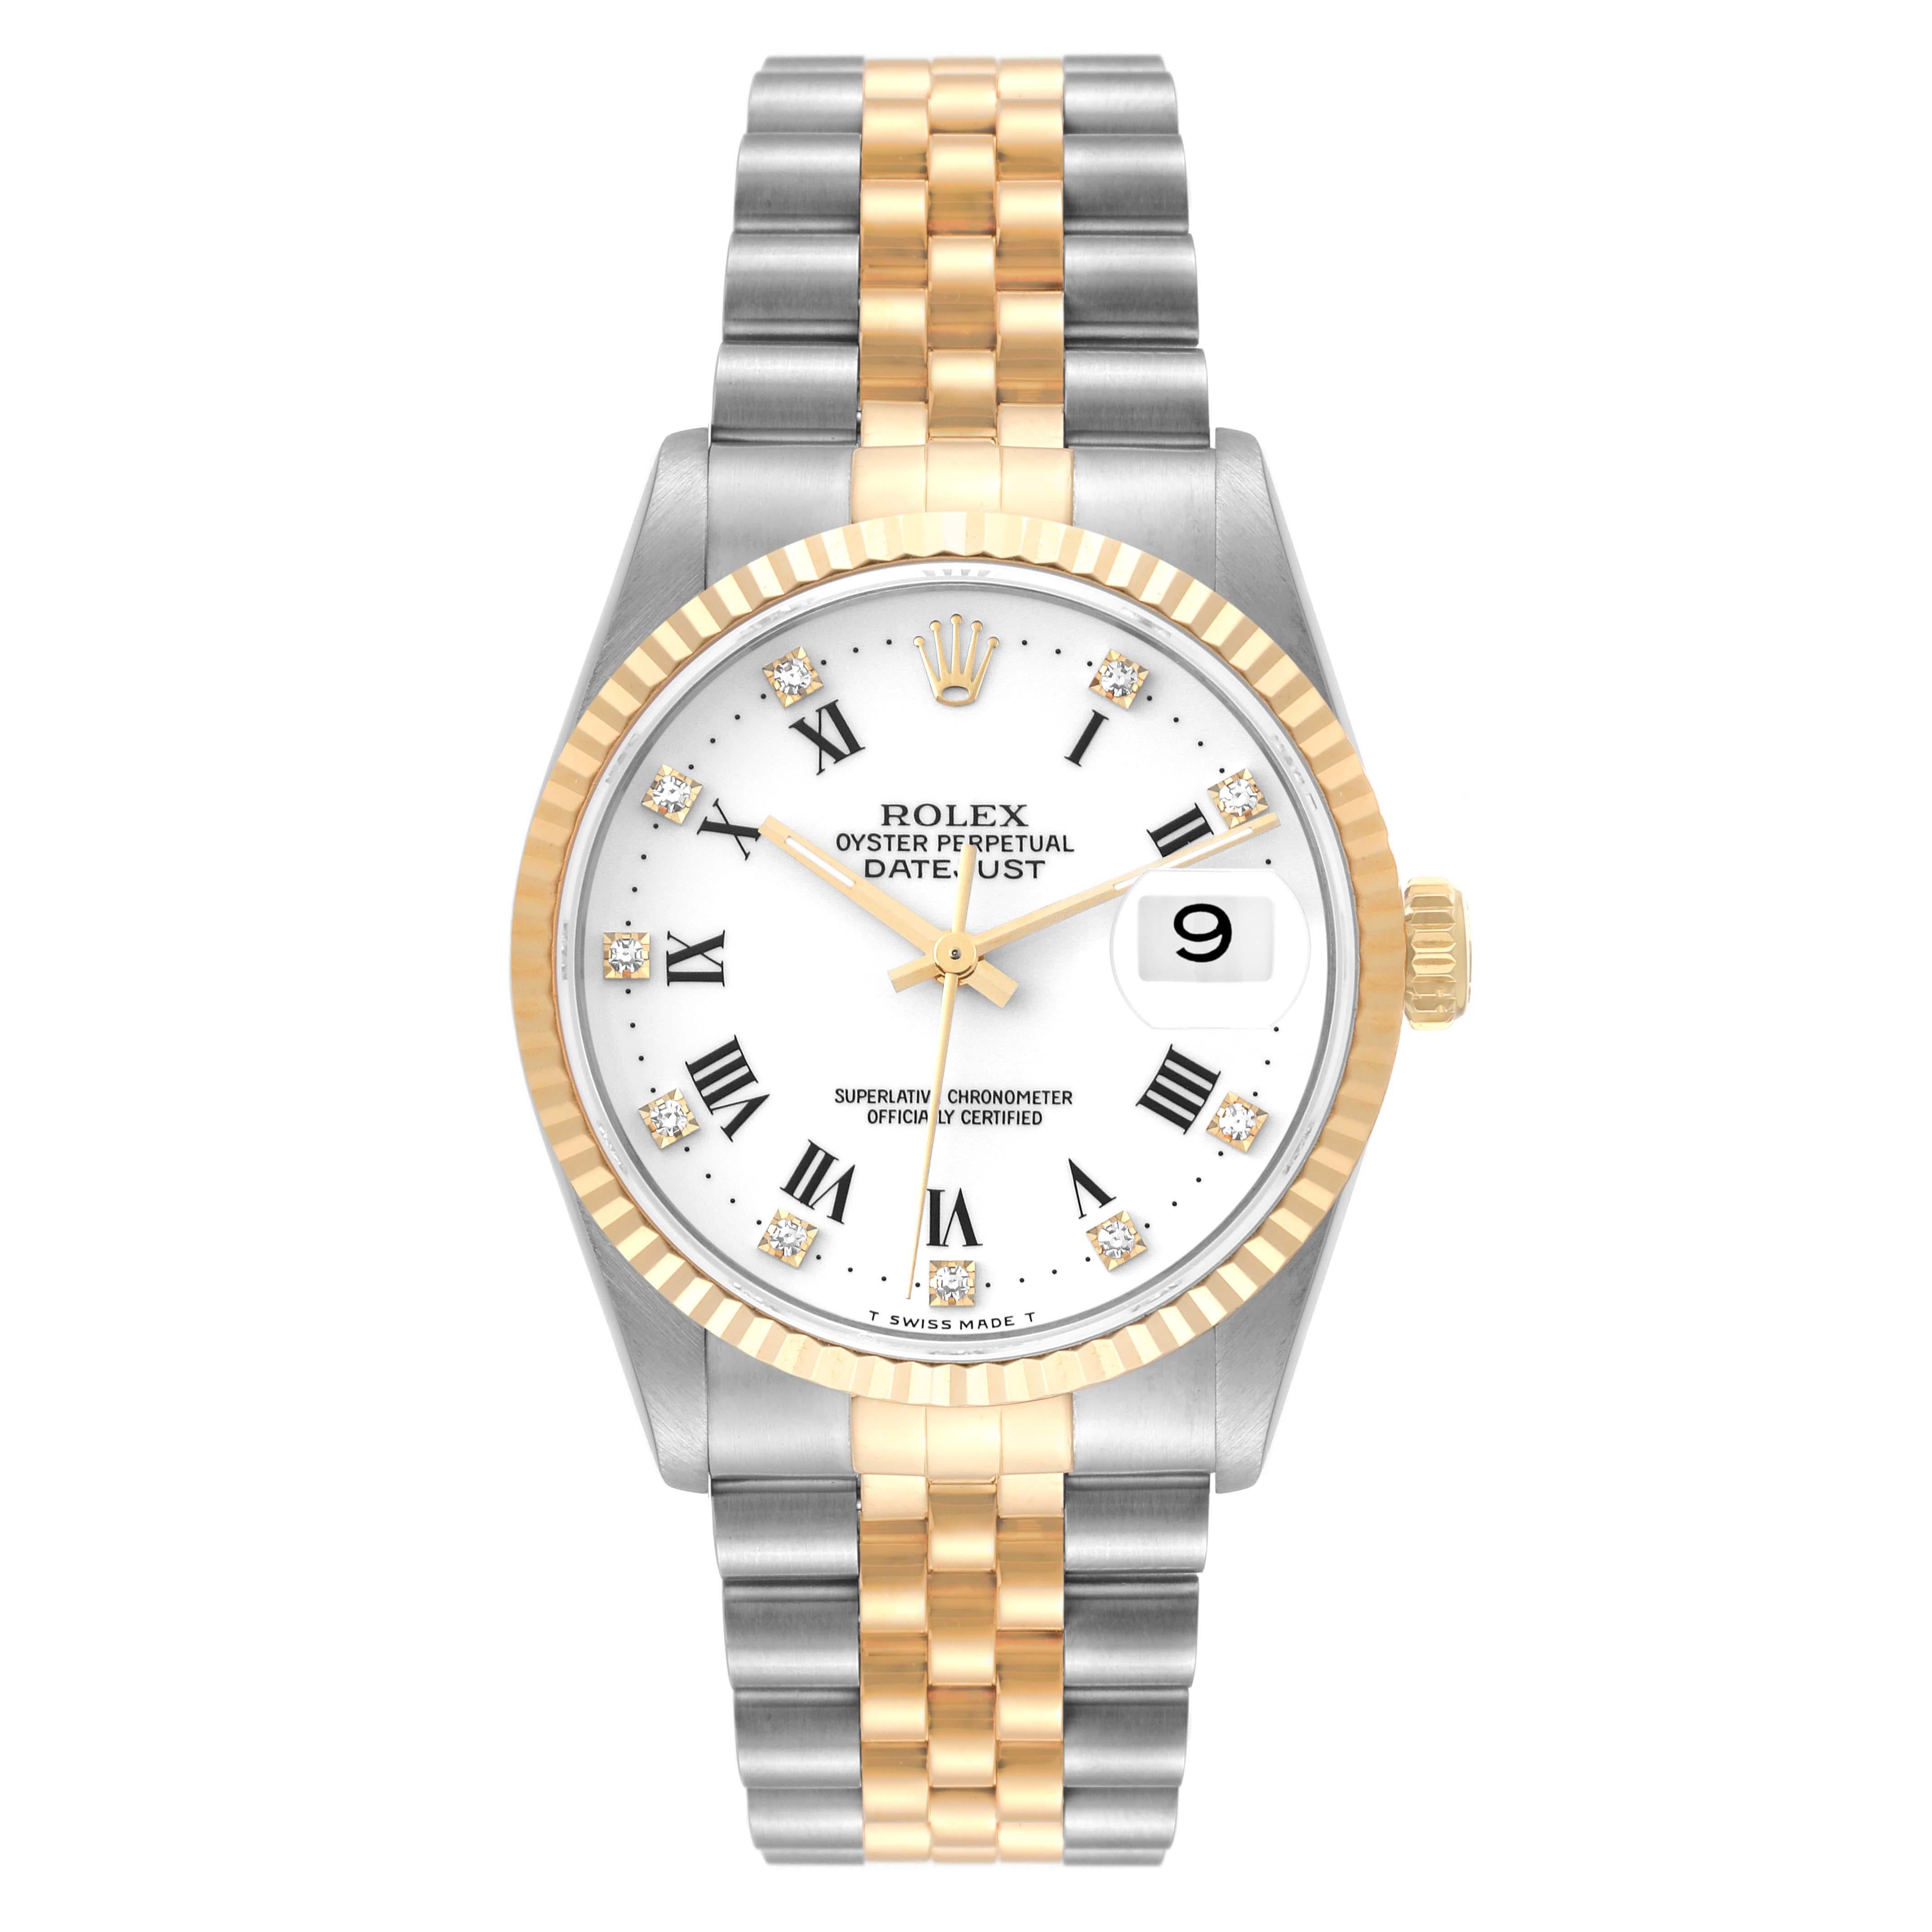 Rolex Datejust Steel Yellow Gold White Diamond Dial Mens Watch 16233 Box Papers. Officially certified chronometer automatic self-winding movement. Stainless steel case 36 mm in diameter.  Rolex logo on an 18K yellow gold crown. 18k yellow gold